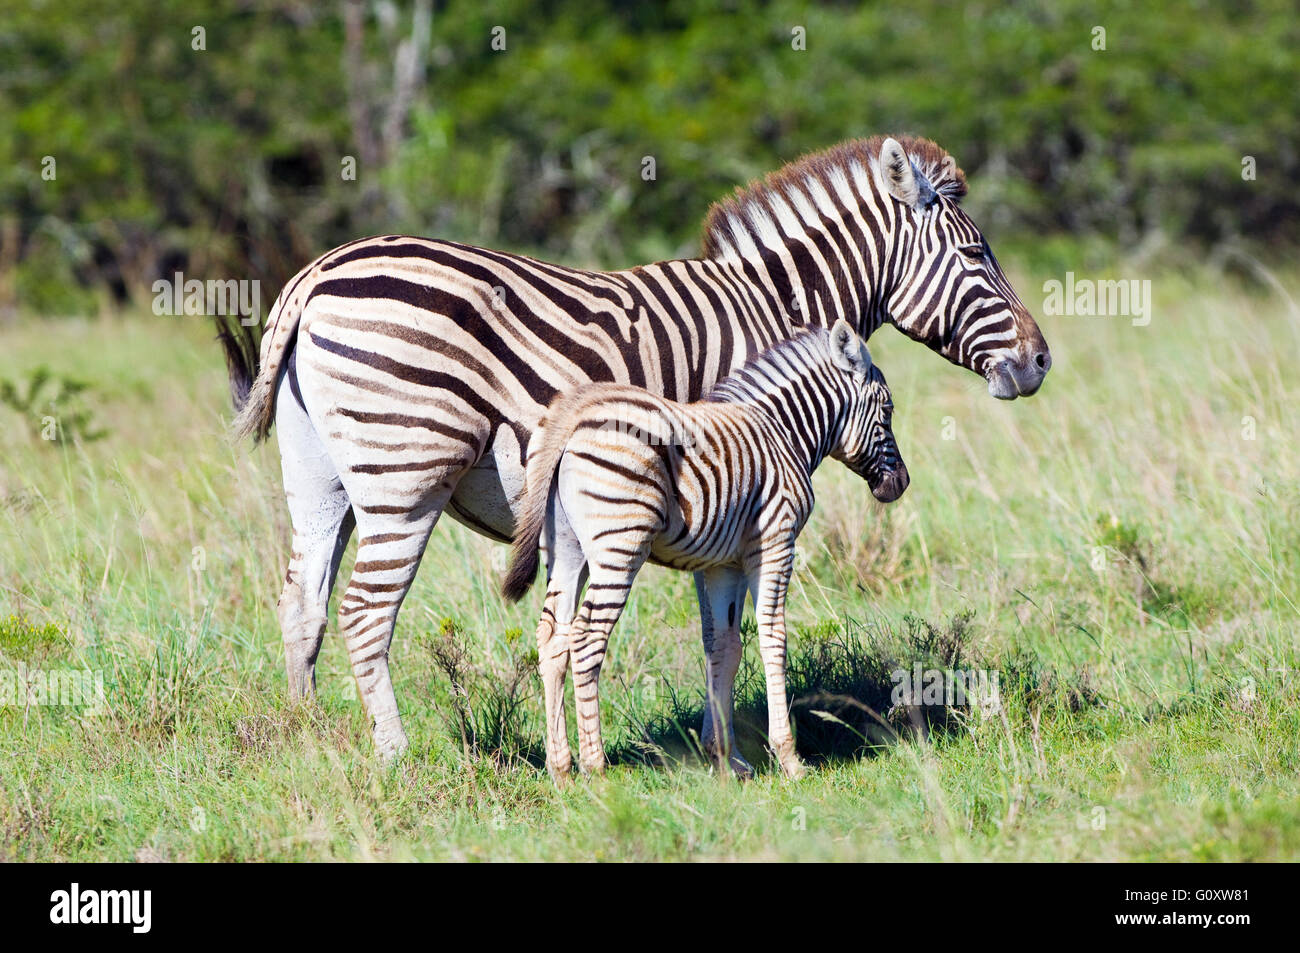 Adult zebra and foal. Image taken in Lalibela Game Reserve near Grahamstown, South Africa. Stock Photo